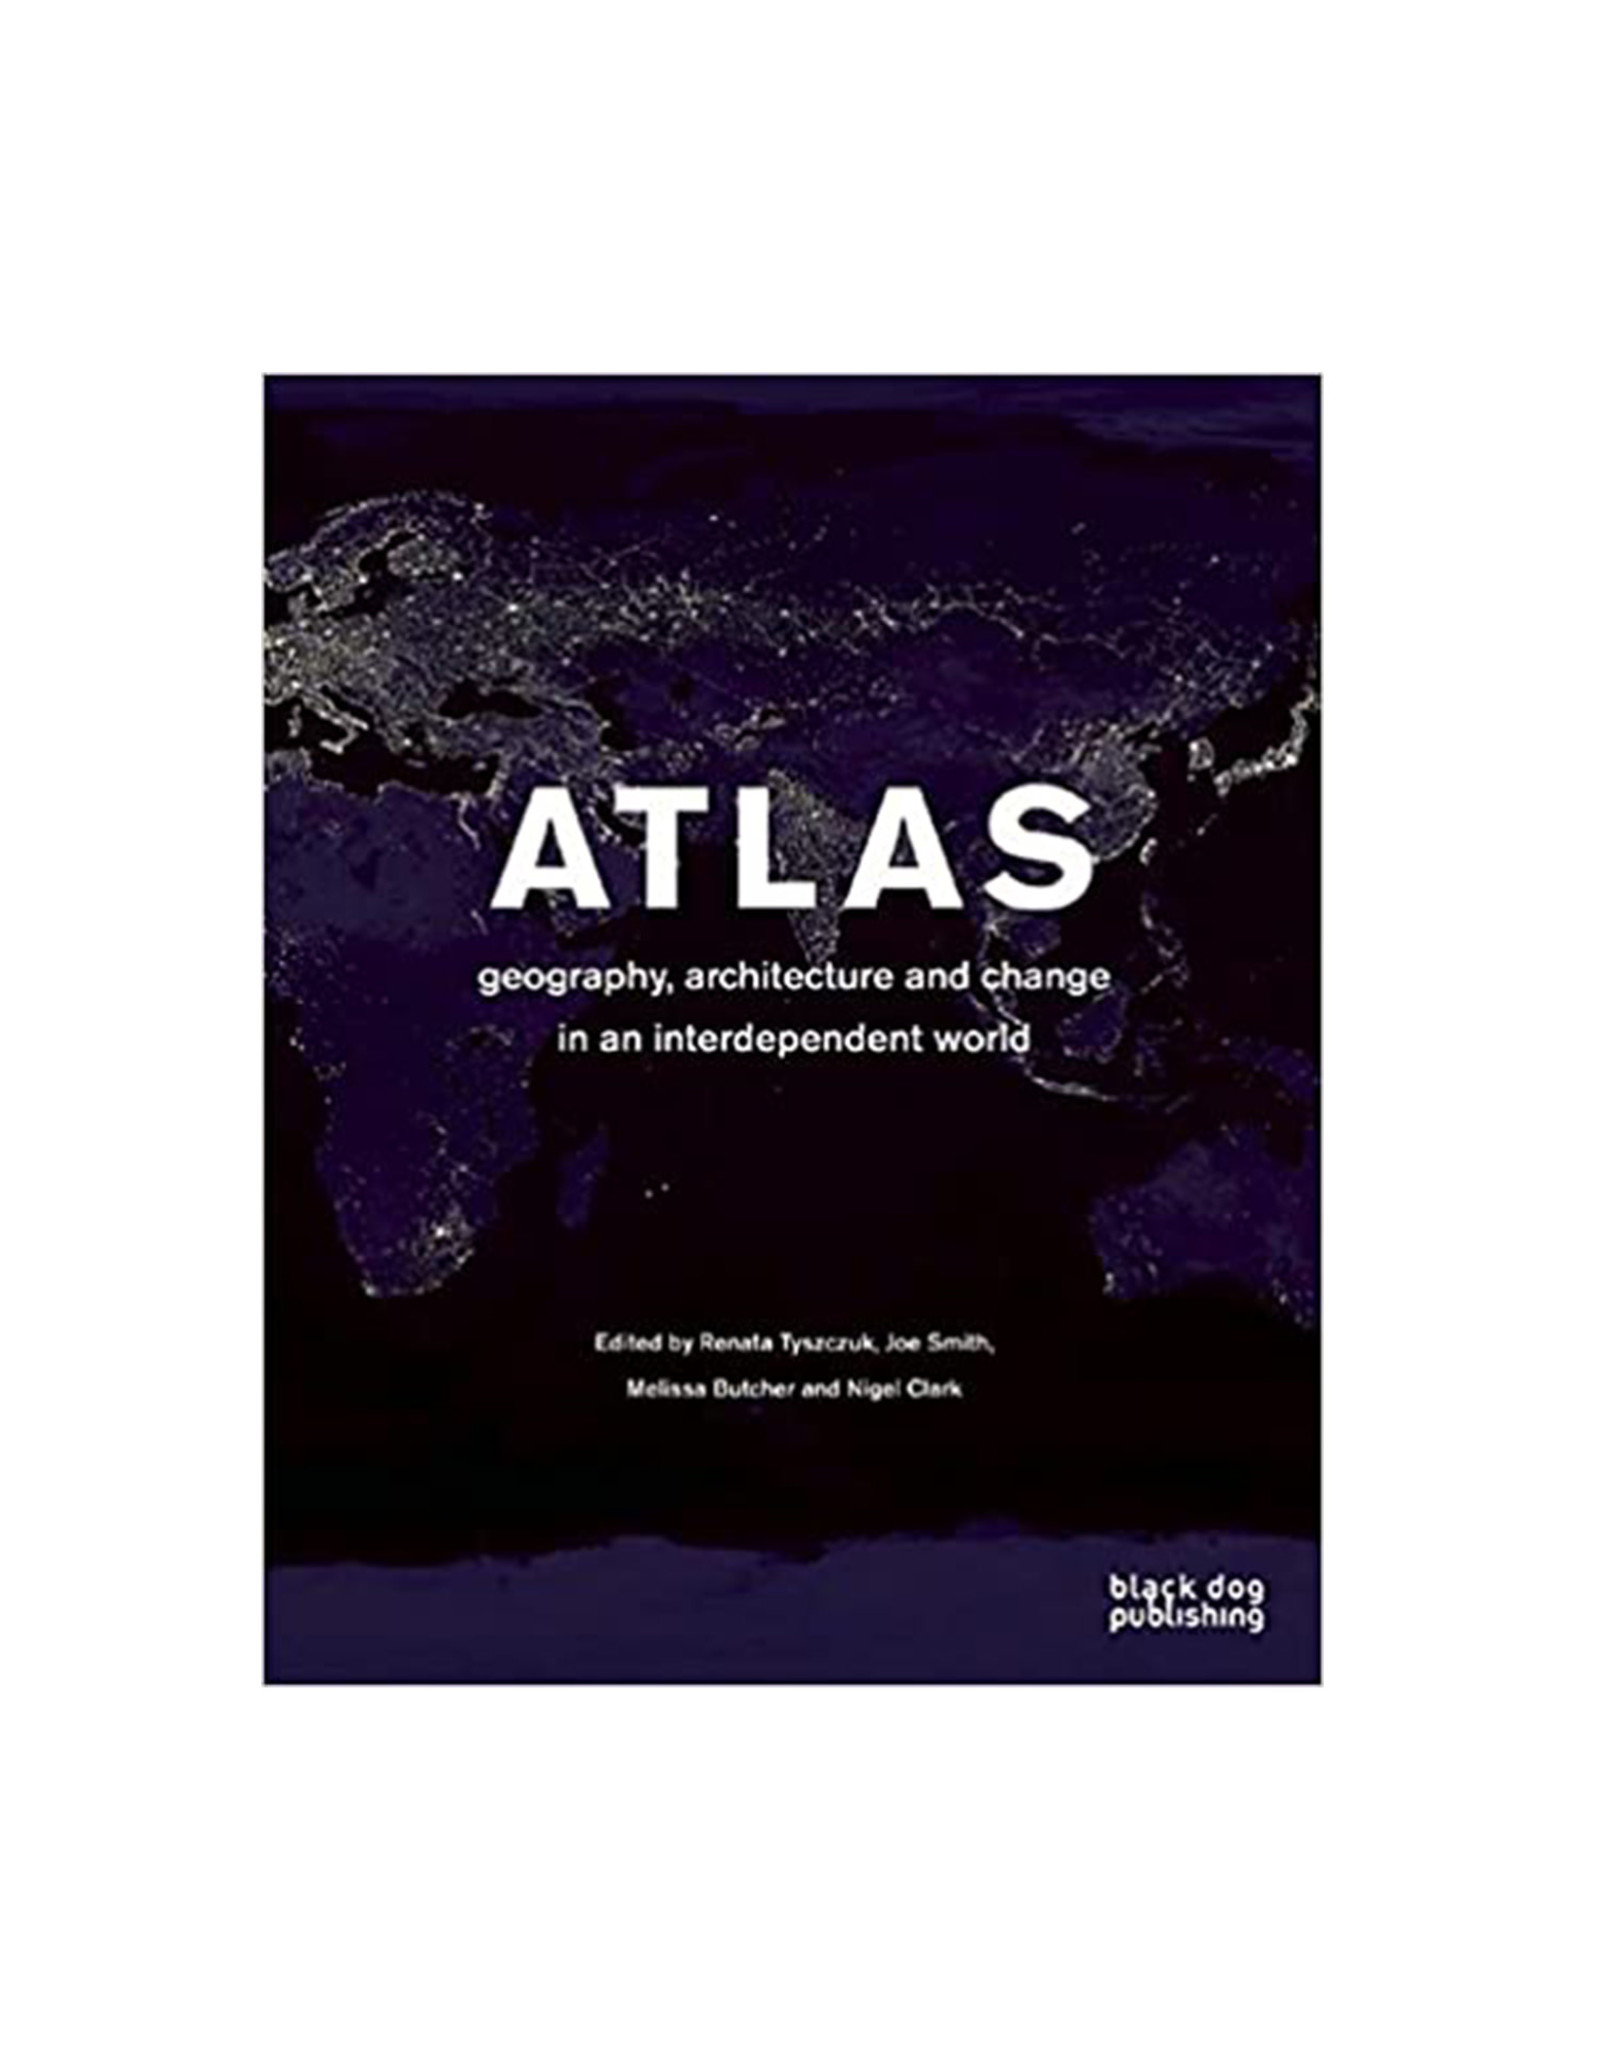 Atlas: Geography, Architecture and Change in an Interdependent World